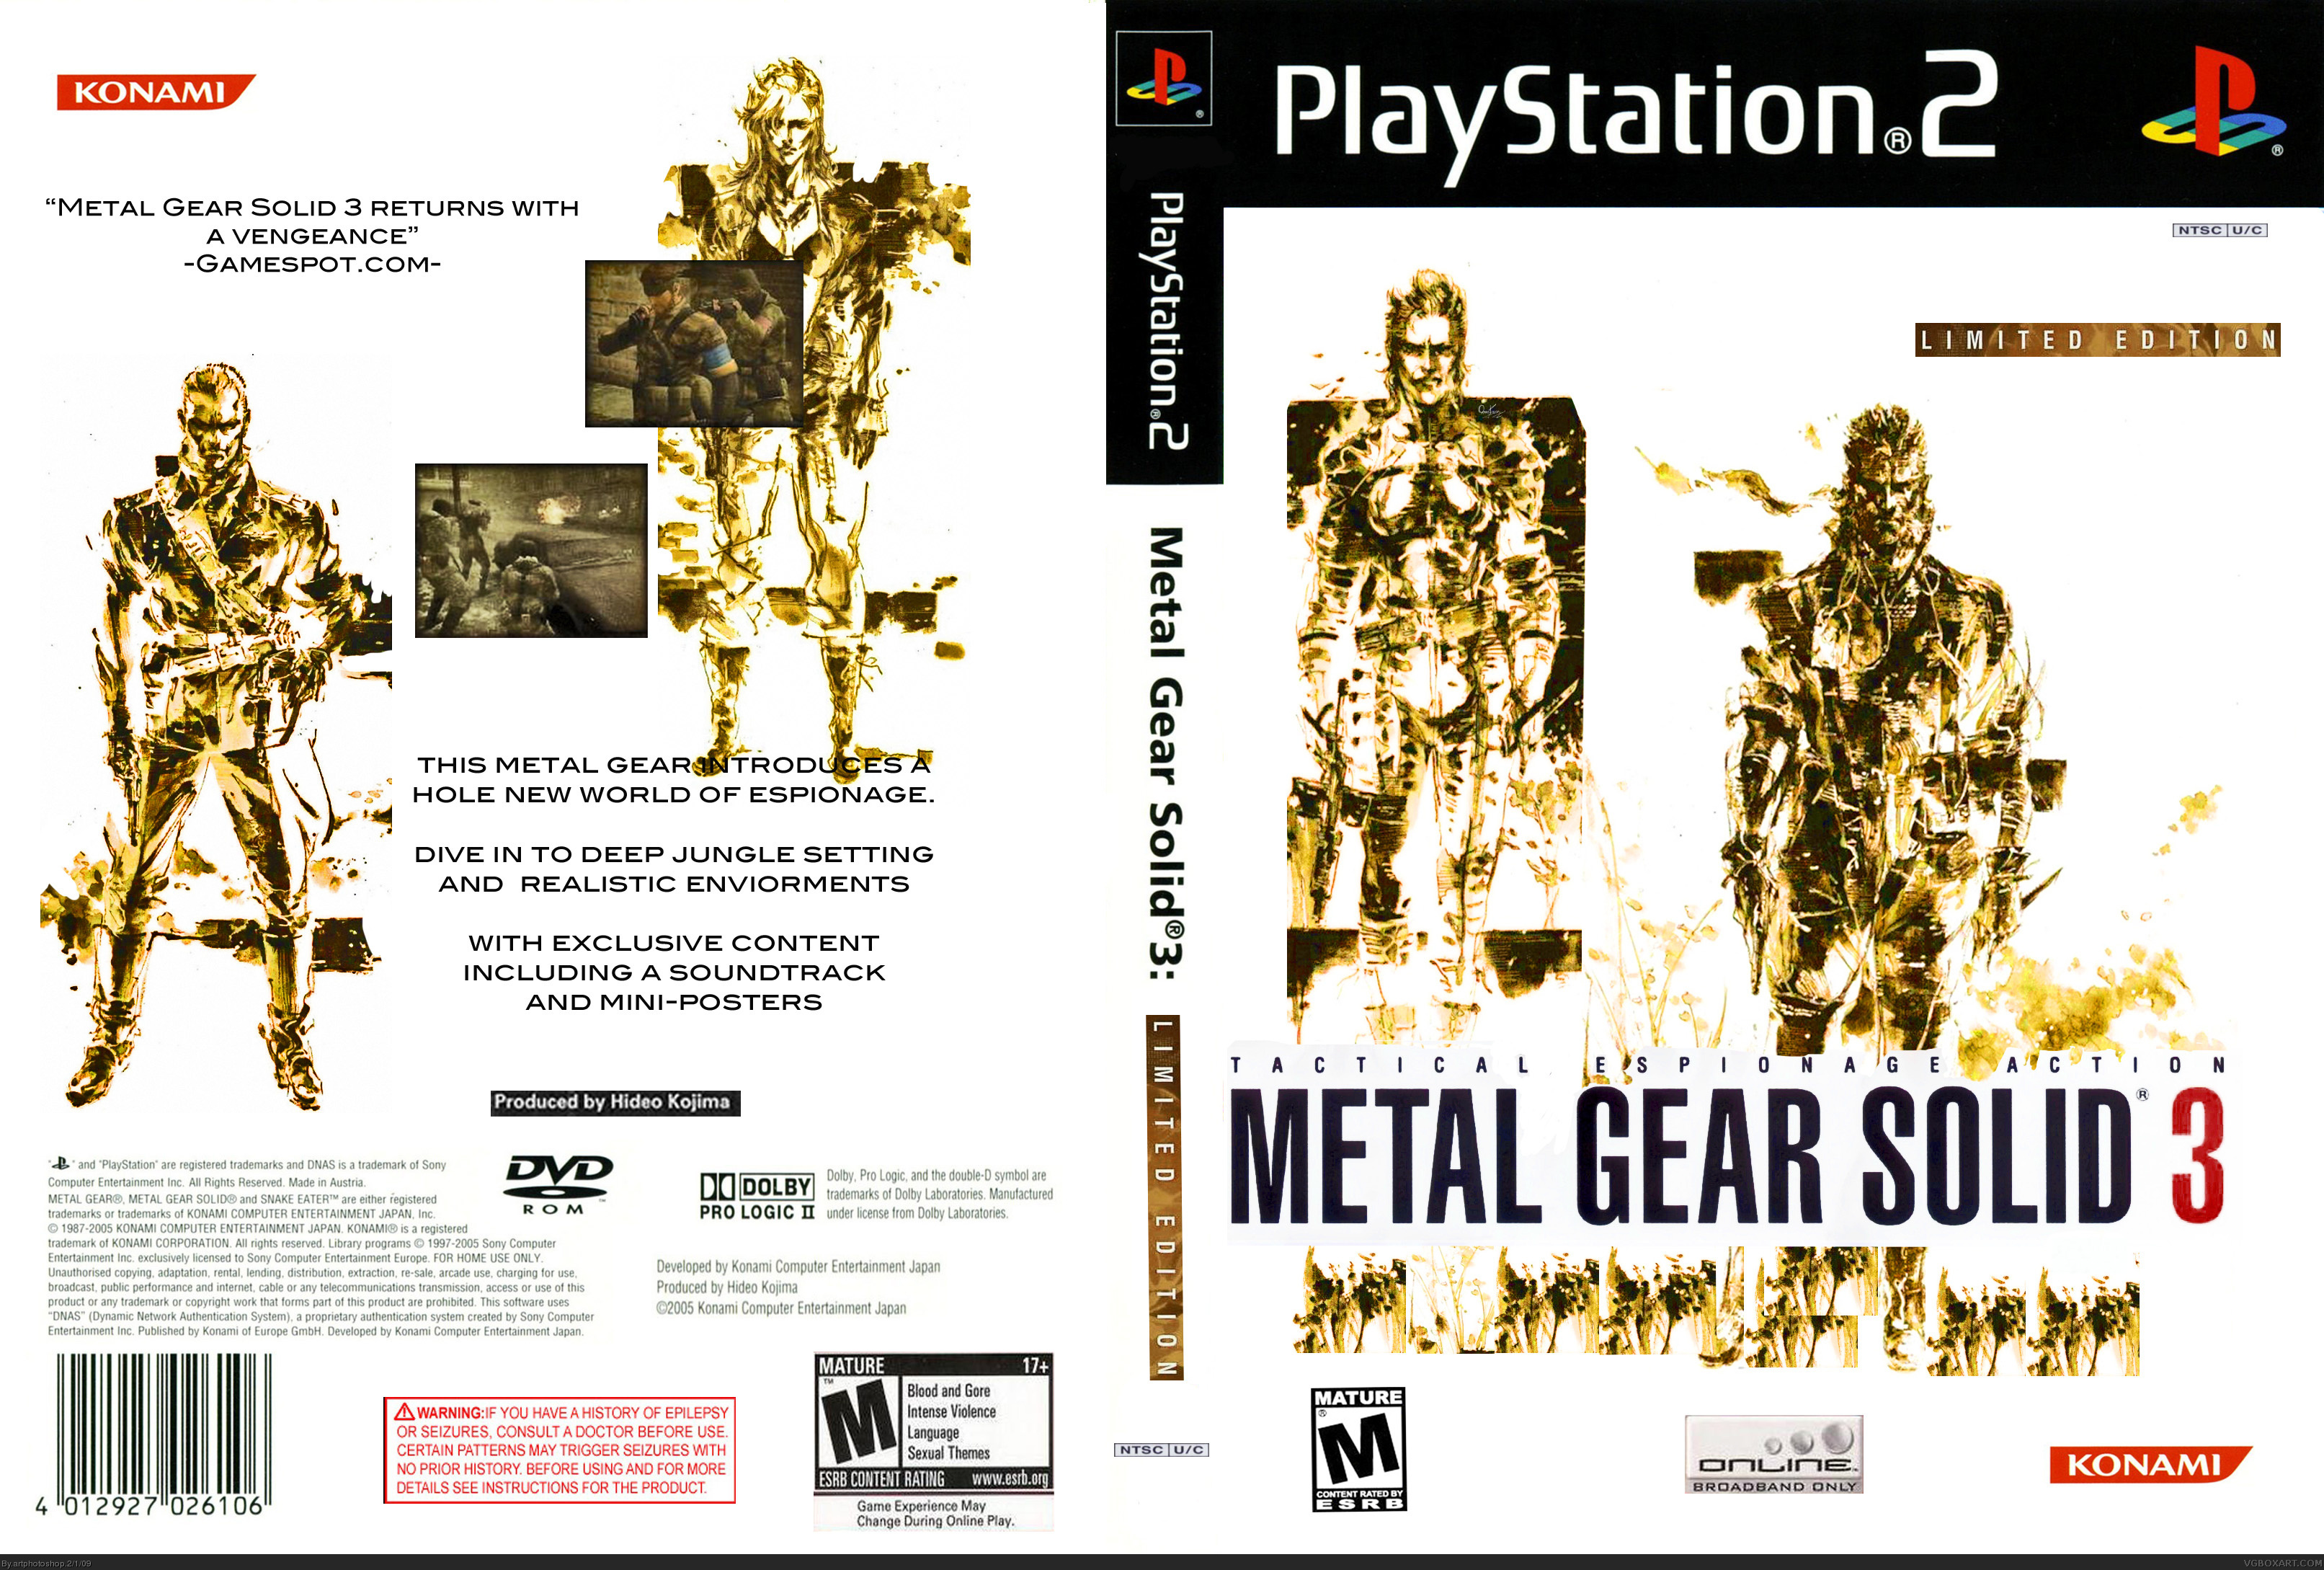 Metal Gear Solid 2: Substance Special Edition box cover